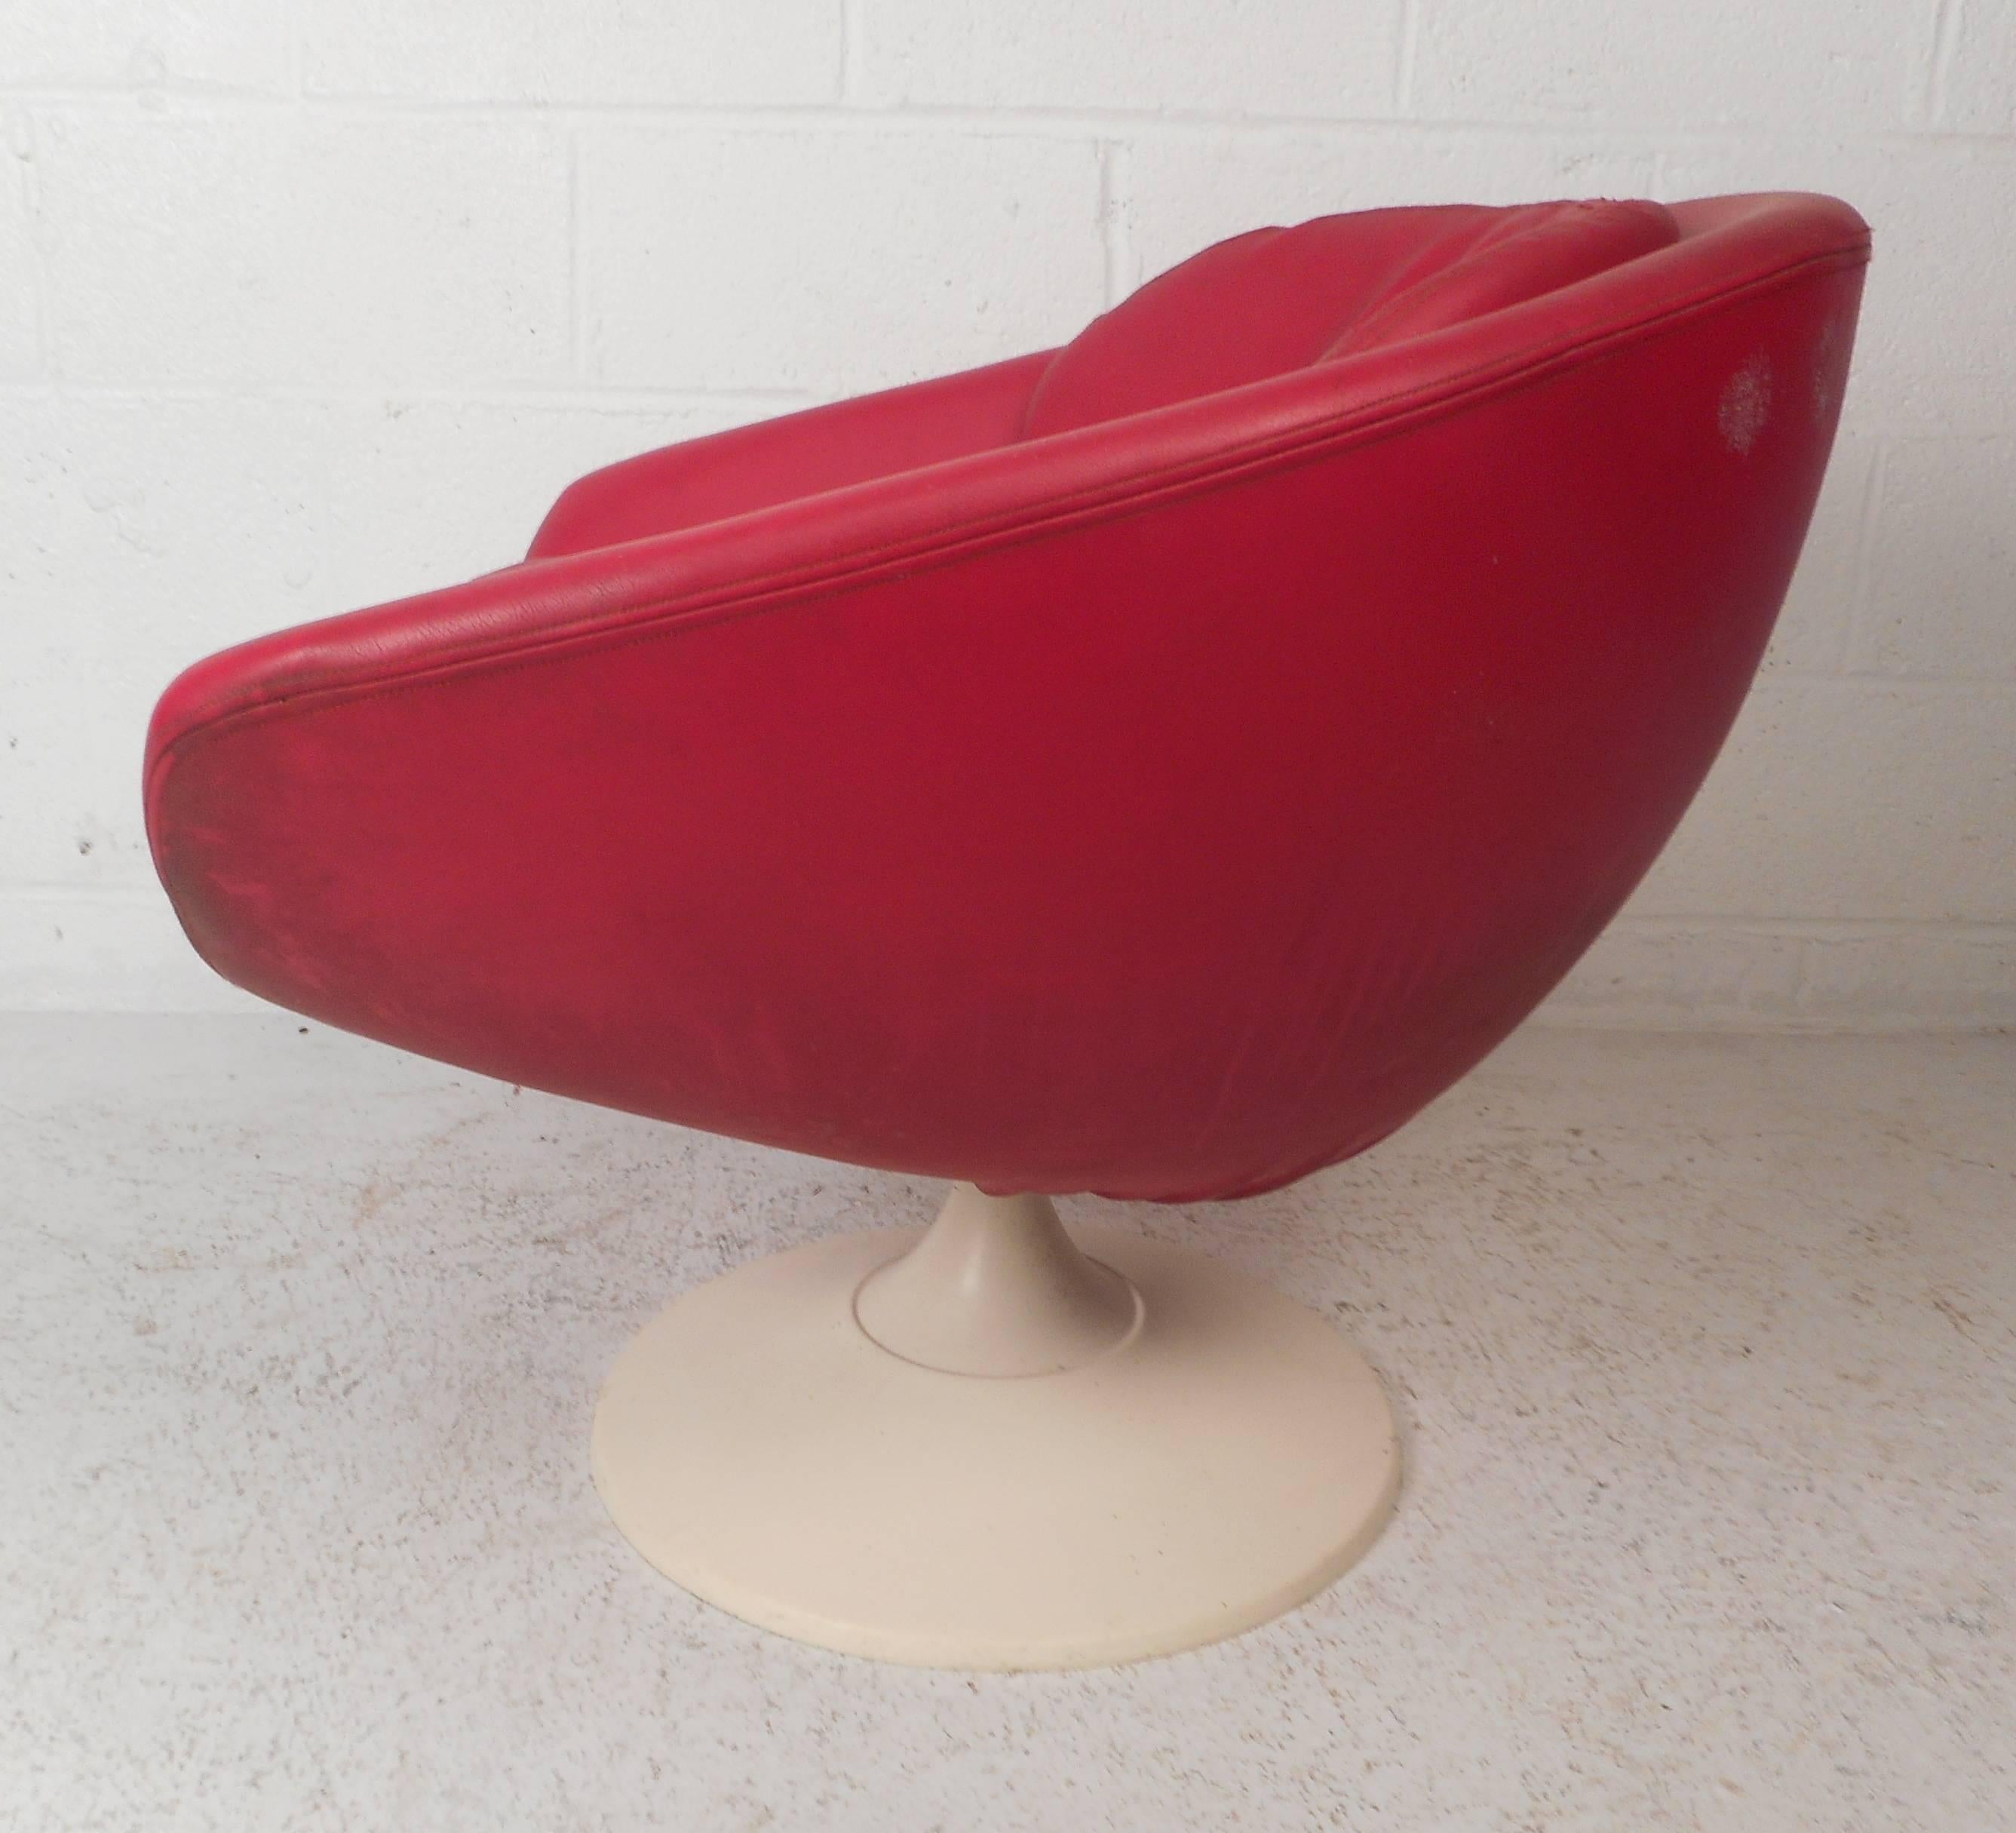 This gorgeous vintage modern lounge chair features a unique tulip shaped base. This unique chair has two overstuffed removable cushions covered in a red vinyl. Sleek and comfortable design with wide seating and the convenient ability to swivel. This